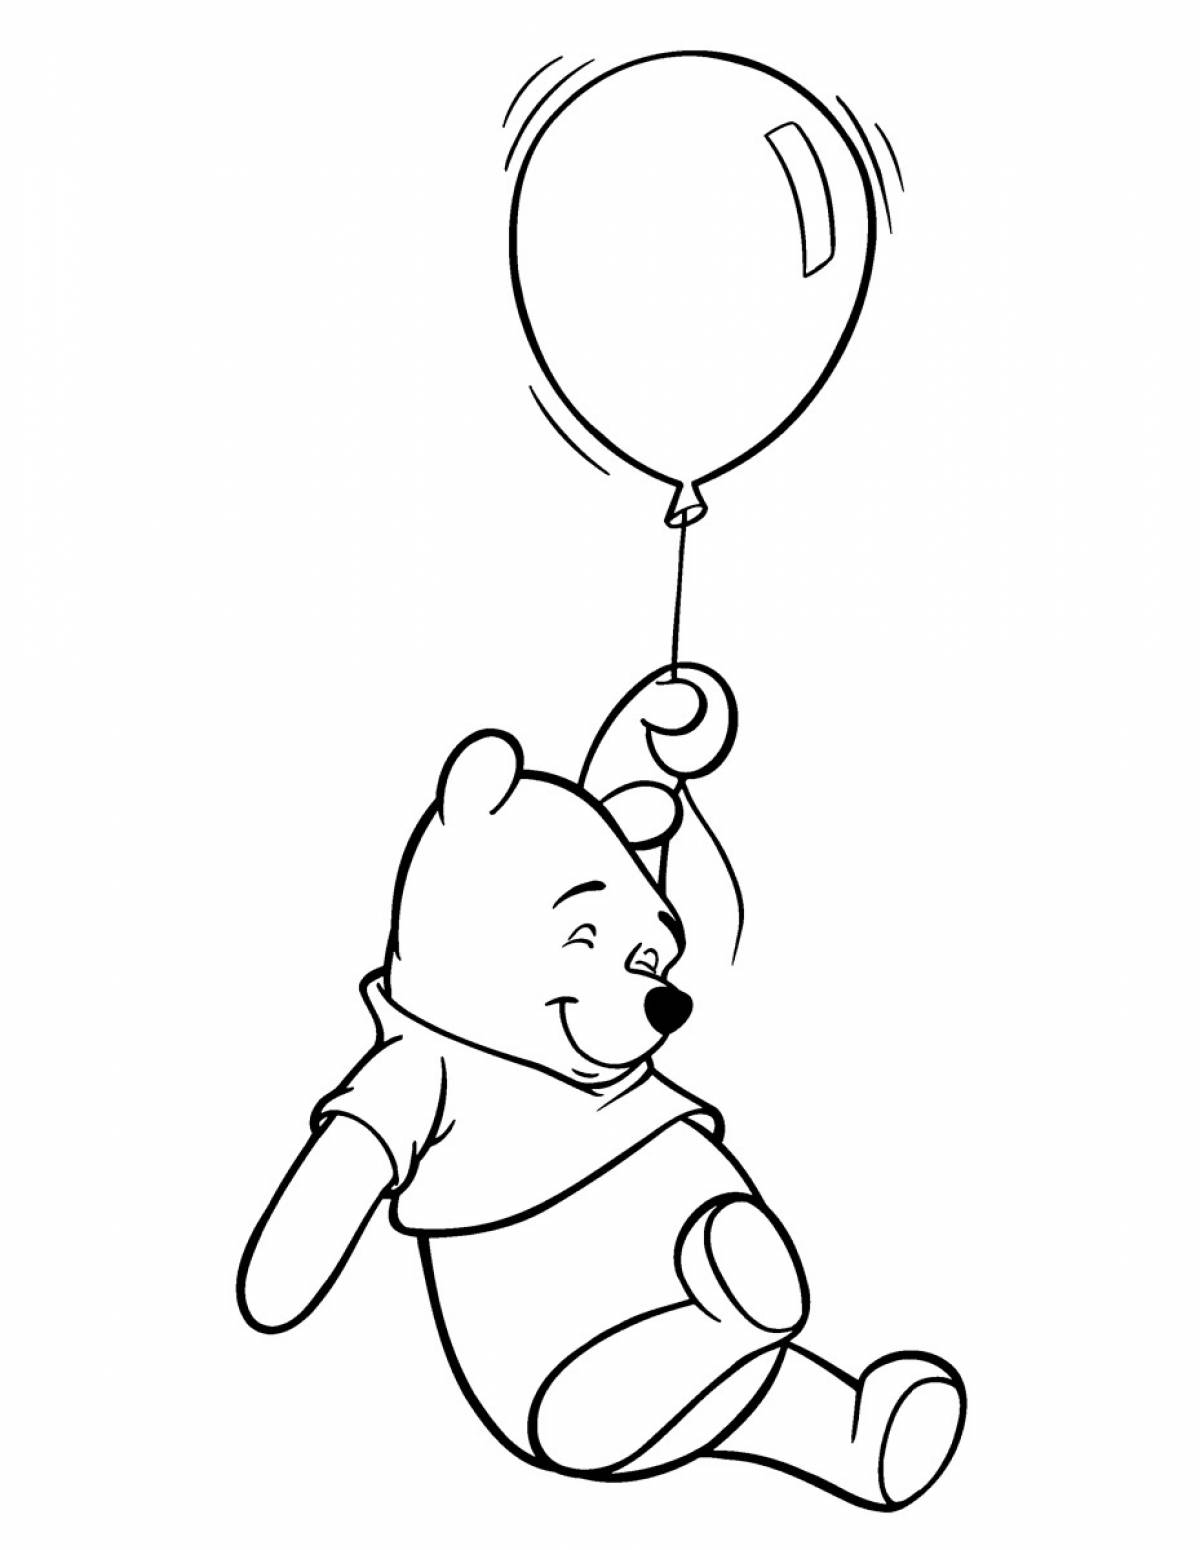 Winnie the pooh and balloon